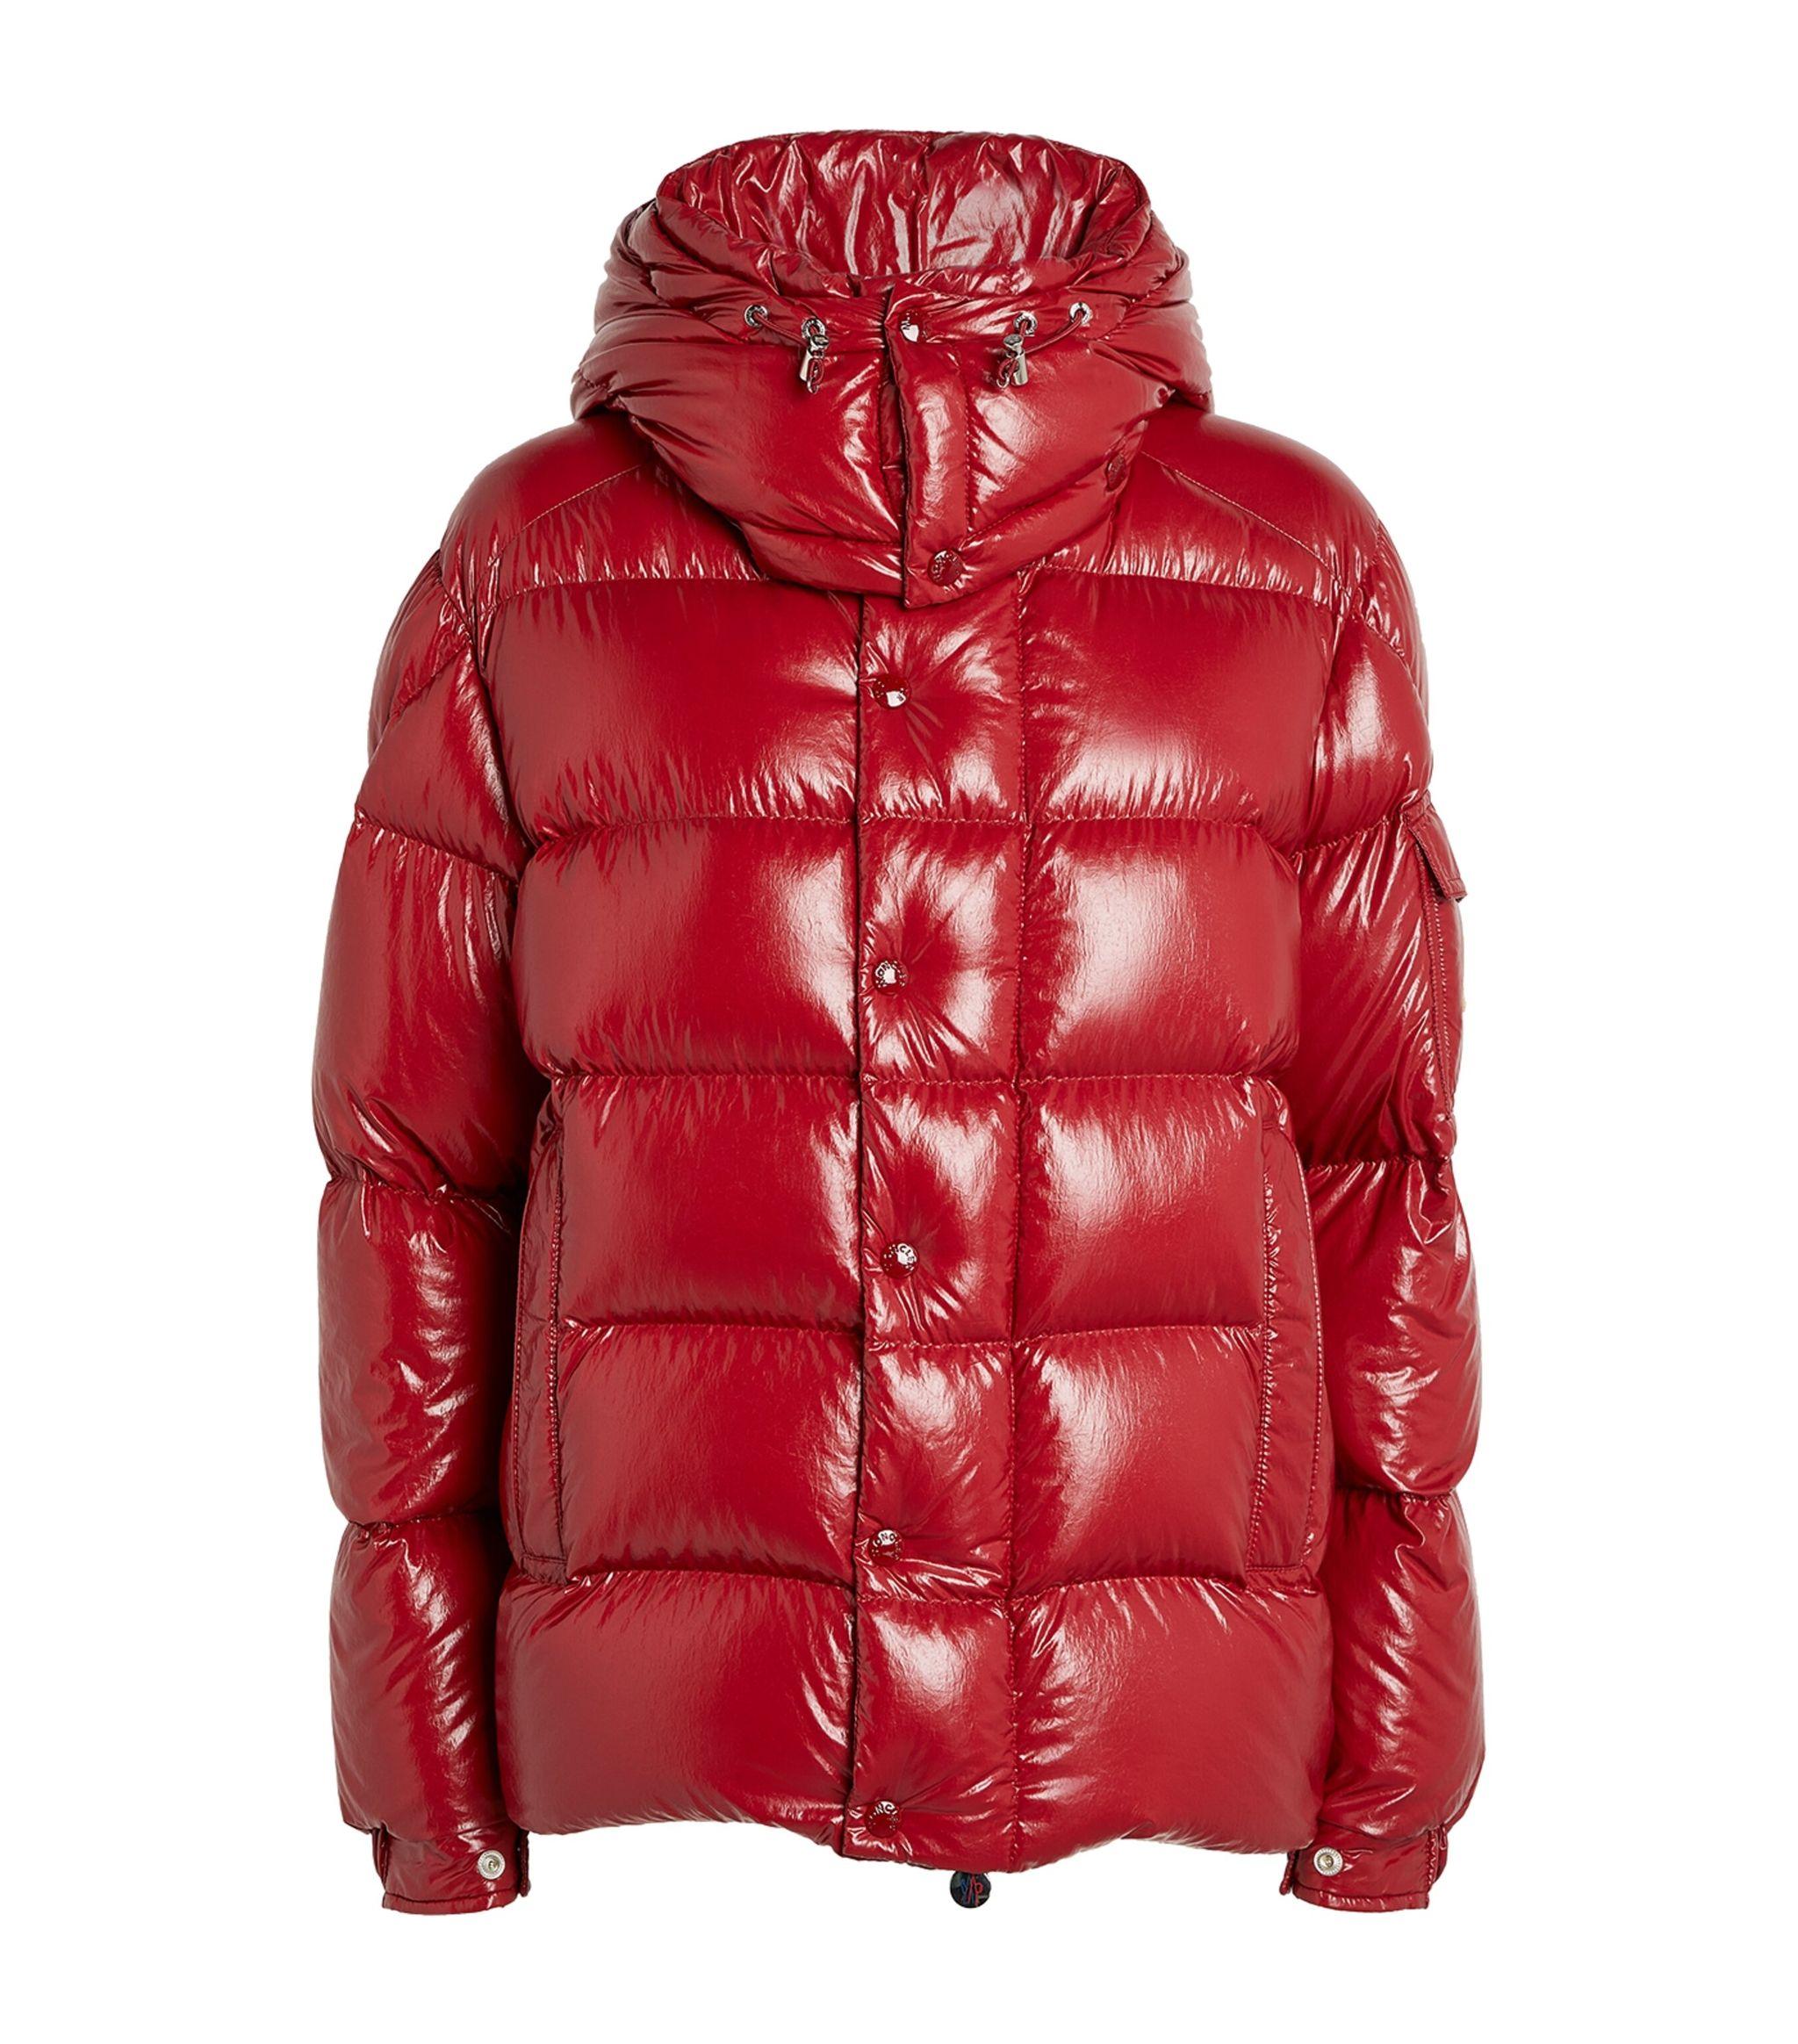 Moncler Synthetic Maya 70 Puffer Jacket in Burgundy (Red) | Lyst